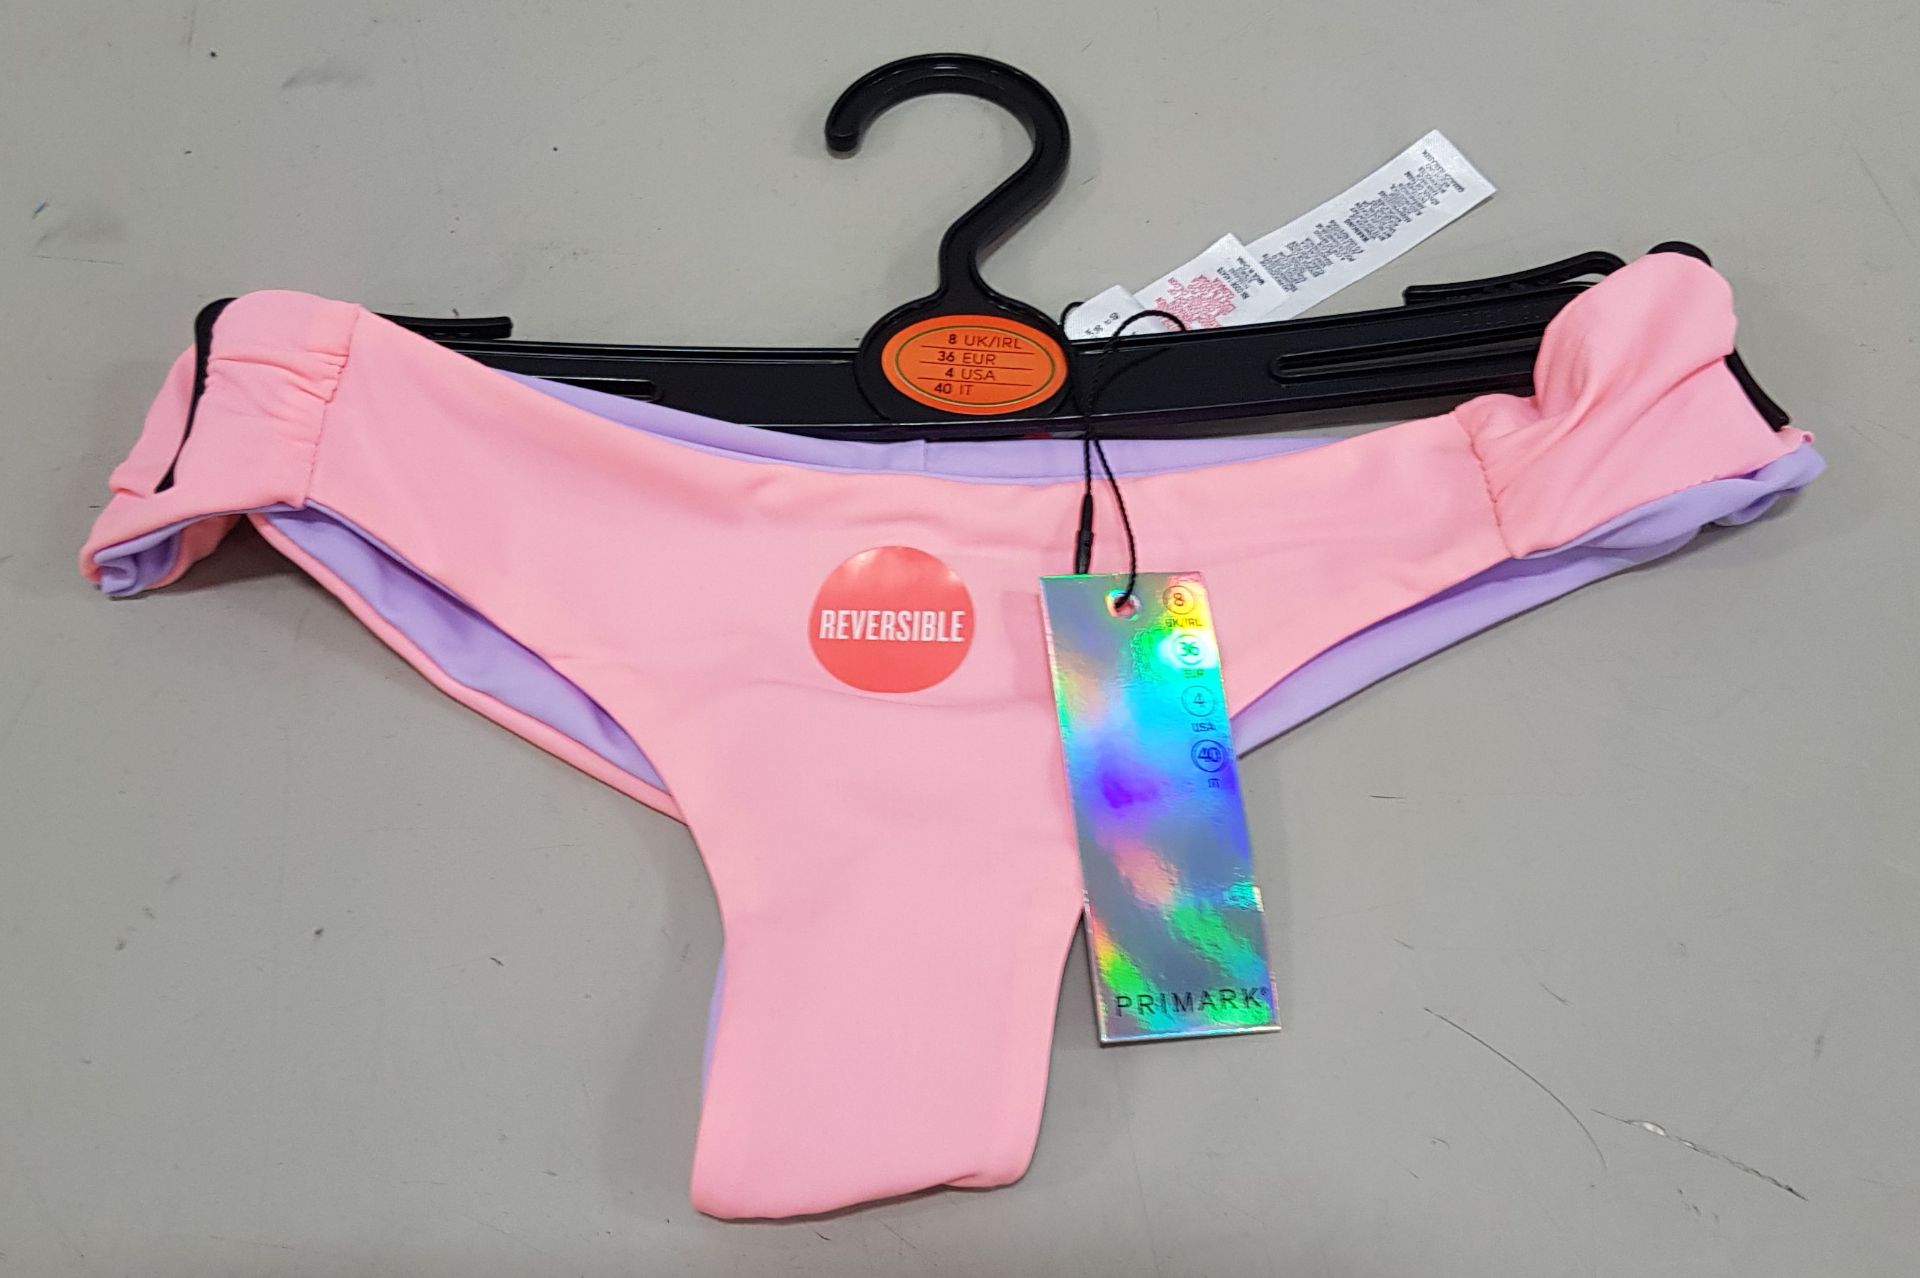 120 X BRAND NEW PRIMARK REVERSIBLE CORAL AND LILAC BIKINI BOTTOMS - INCLUDES ALL SIZES 6 -18 UK